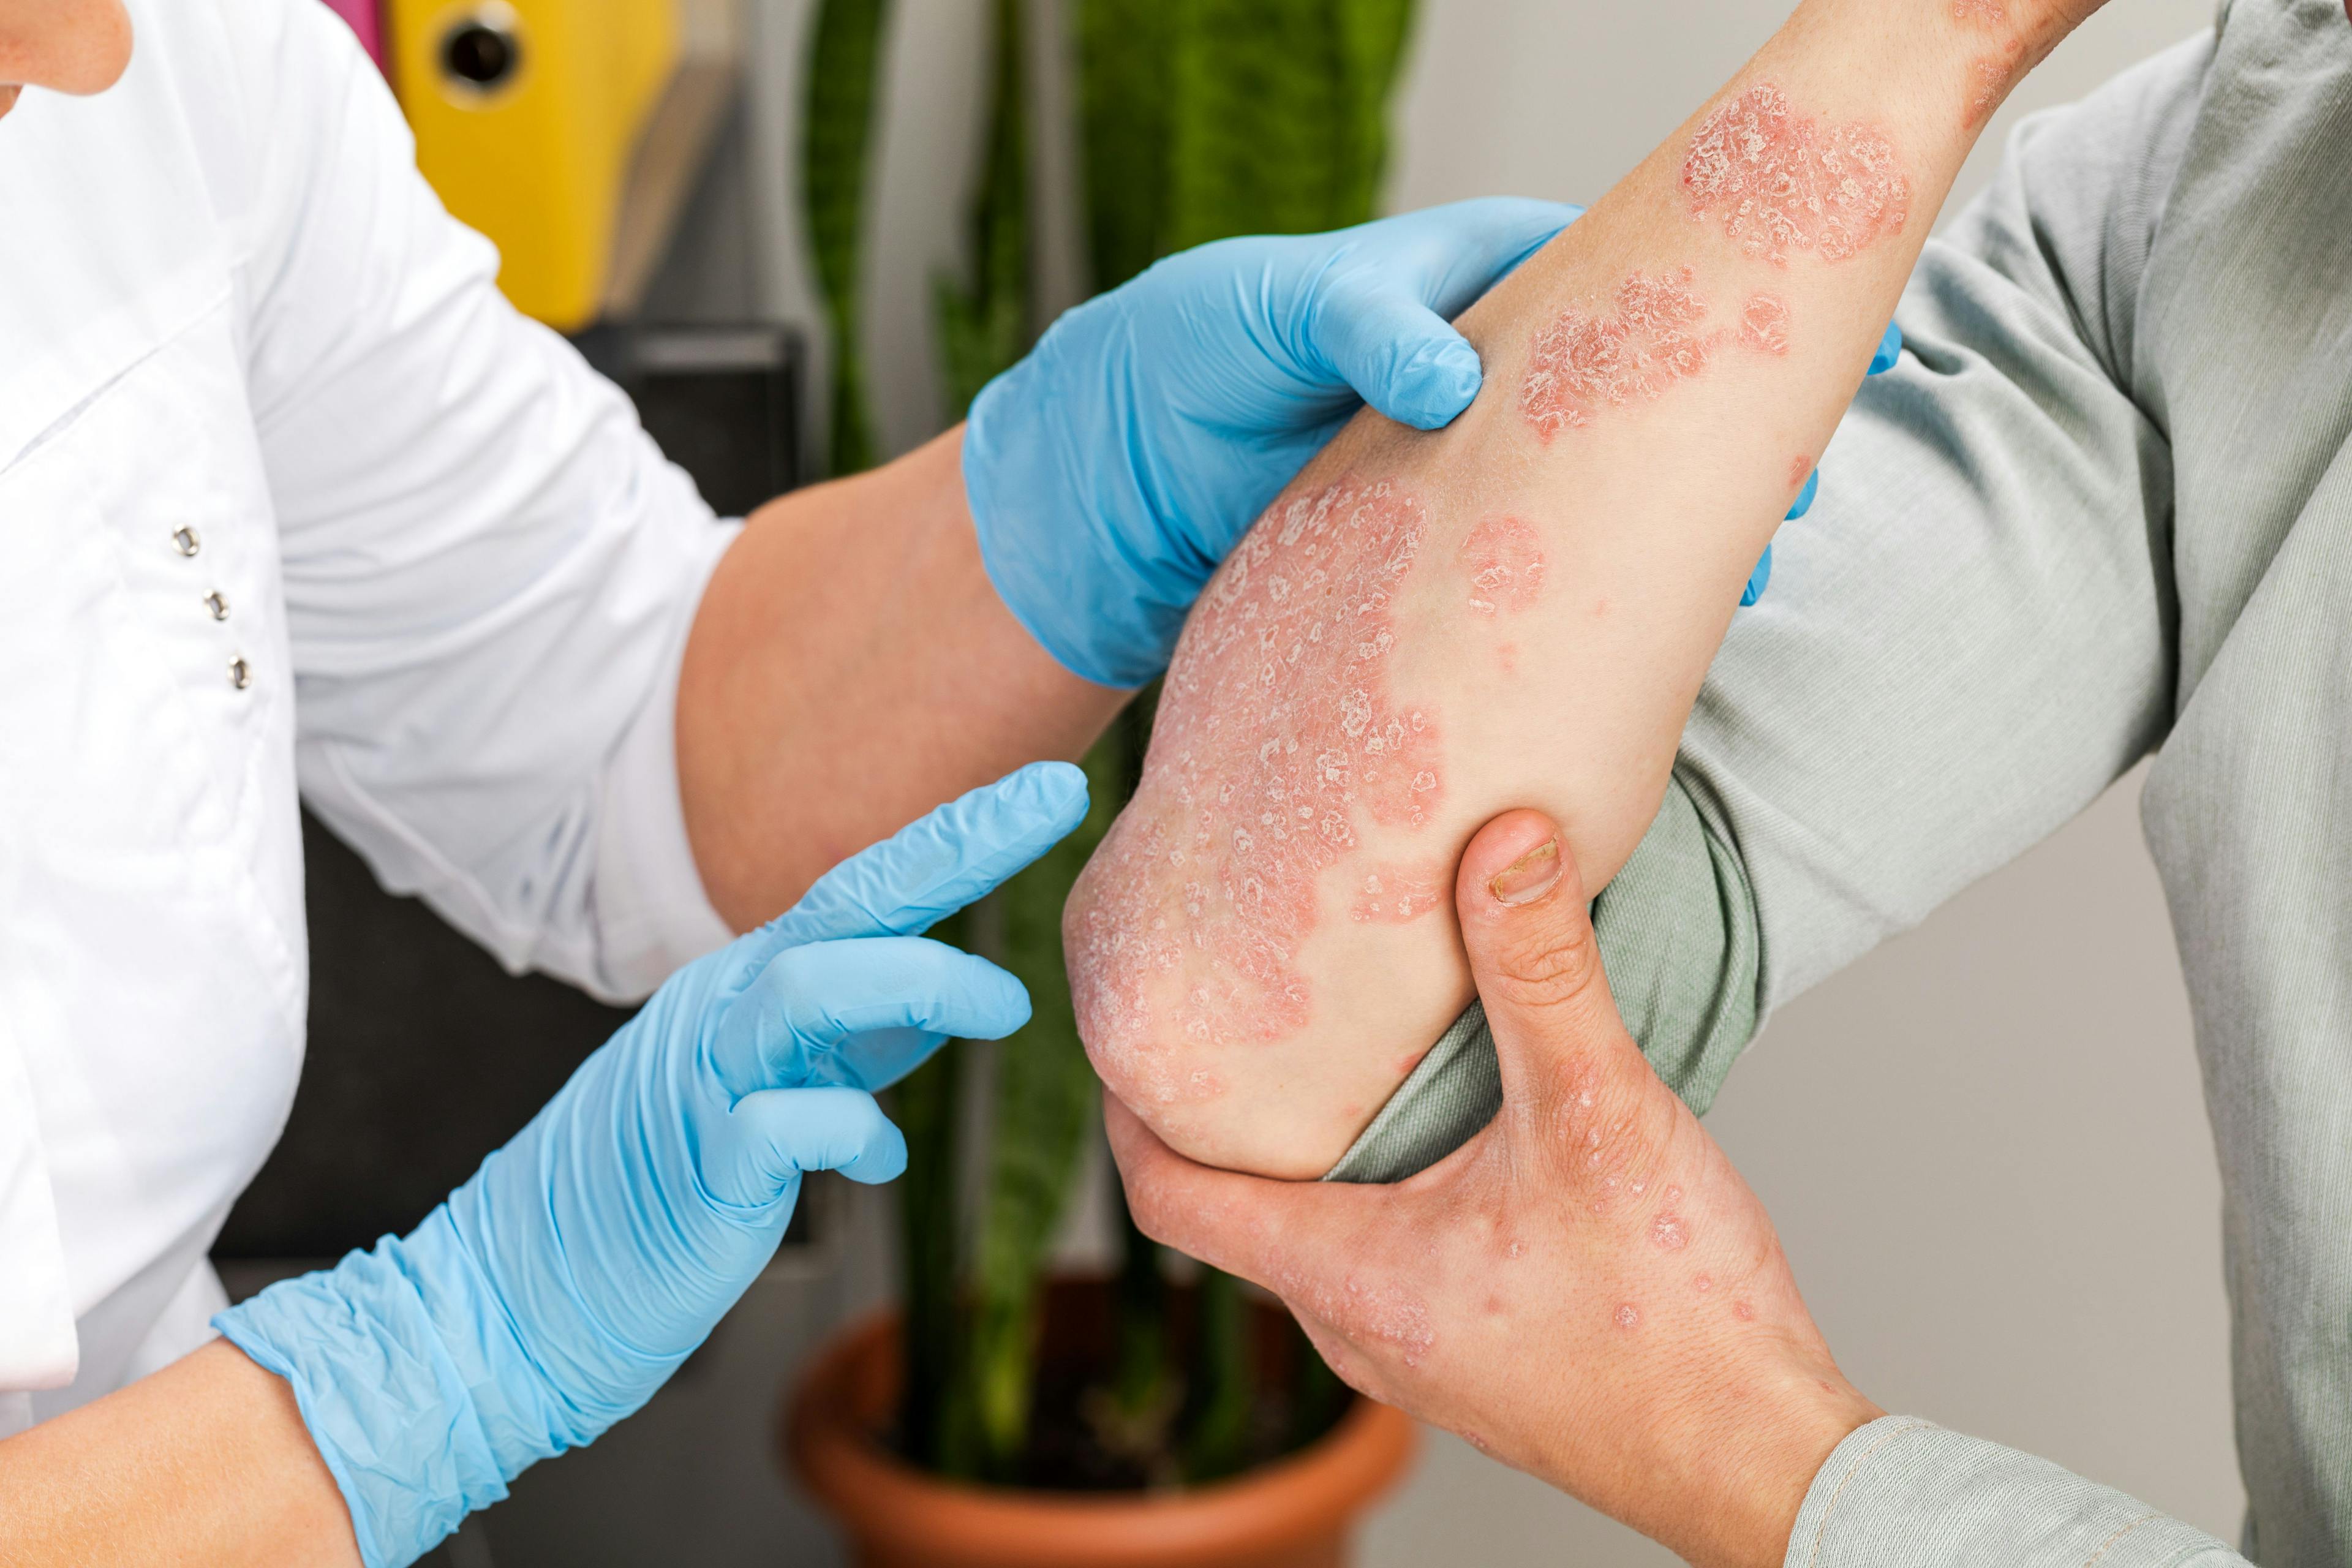 A dermatologist wearing gloves examines the skin of a sick patient. Examination and diagnosis of skin diseases-allergies, psoriasis, eczema, dermatitis | Image credit: fusssergei - stock.adobe.com